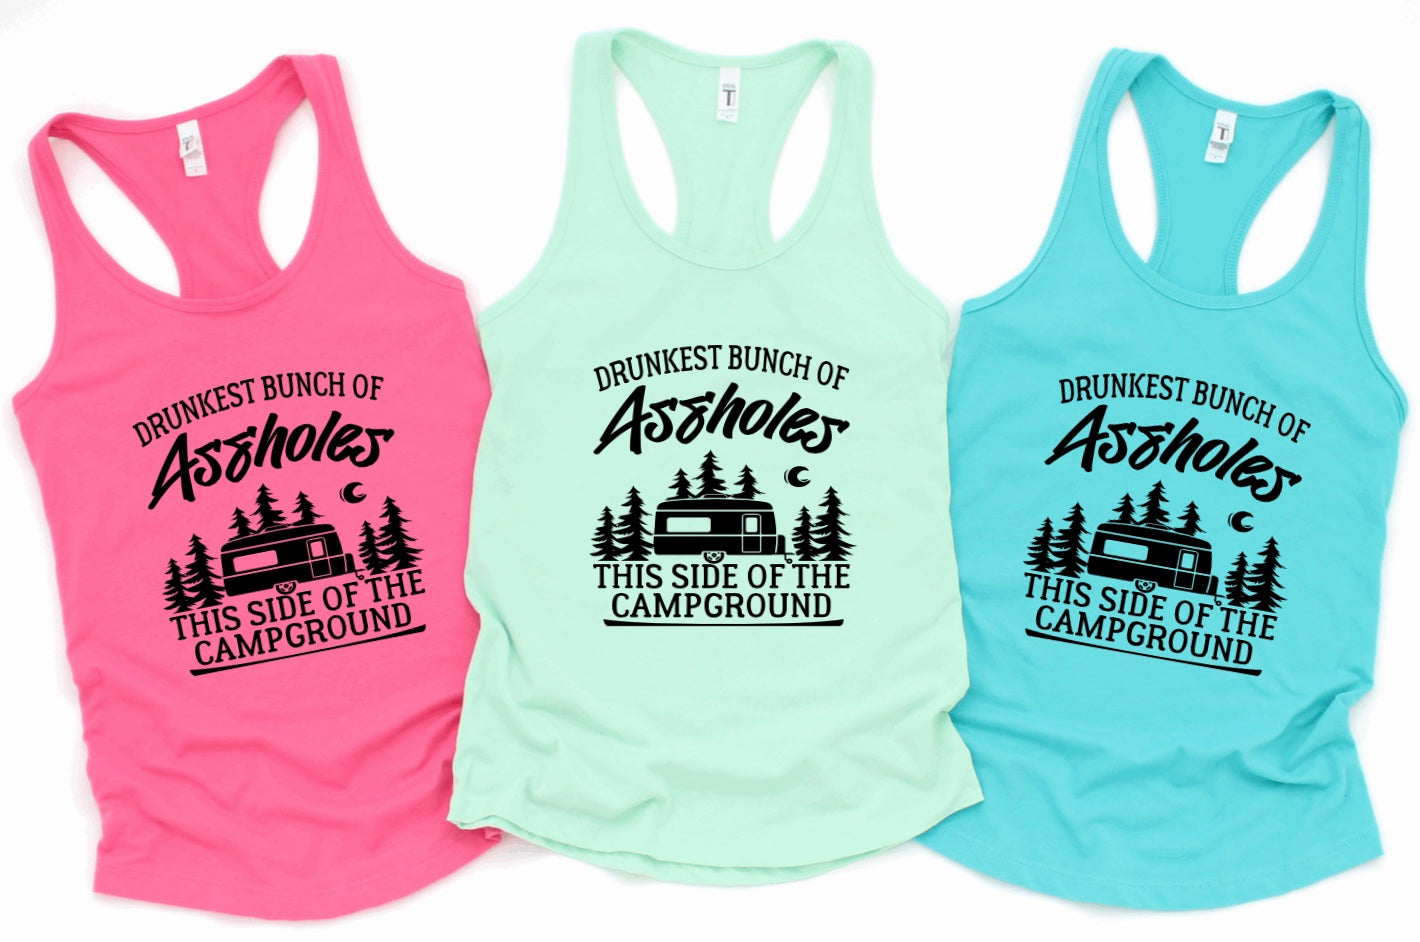 Drunkest bunch of assholes this side of the campground racerback tank tops 